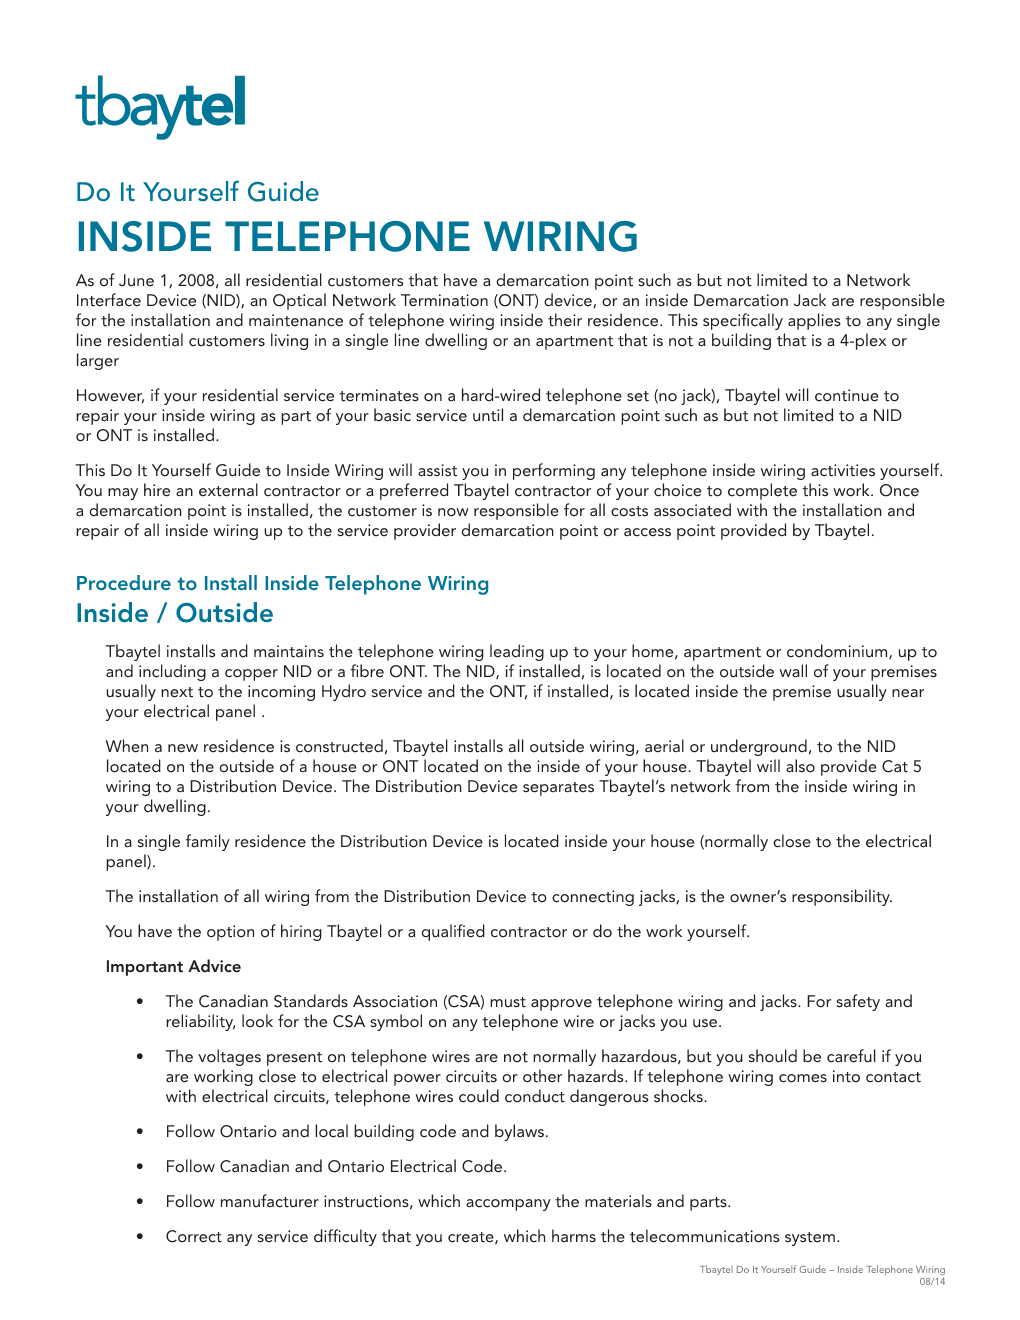 Do It Yourself Guide, Inside Telephone Wiring